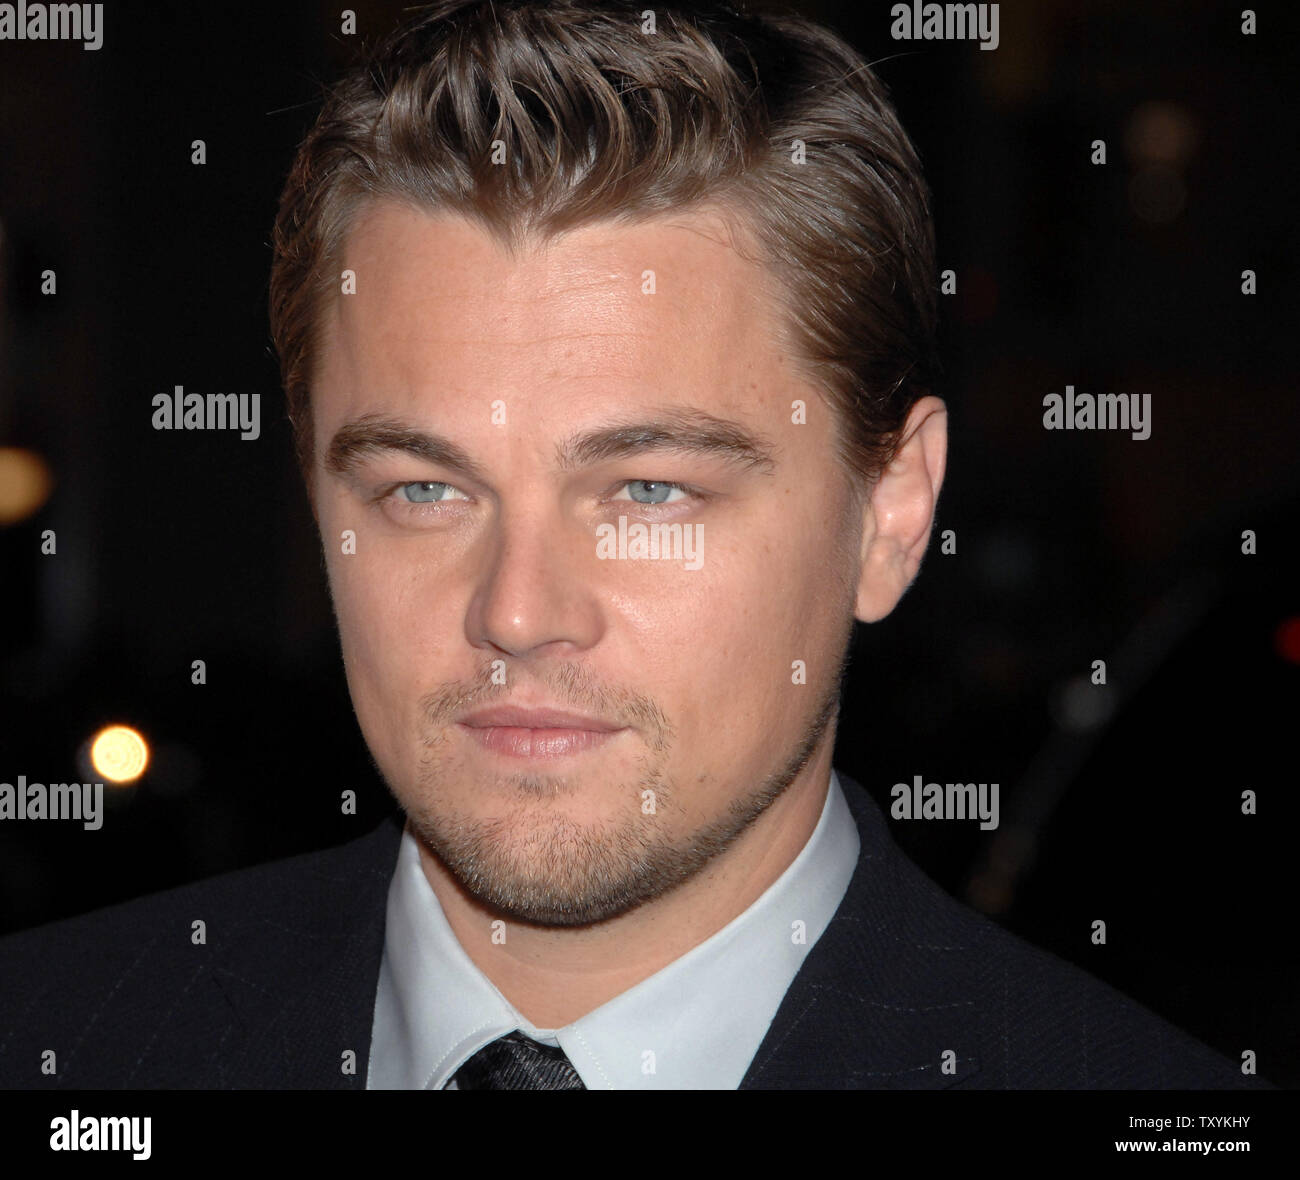 Actor Leonardo DiCaprio, star of the new motion picture drama 'Blood Diamond', arrives for the premiere of the film at Grauman's Chinese Theatre in the Hollywood section of Los Angeles on December 6, 2006. The film, set in Sierra Leone is about a quest to recover a rare diamond. (UPI Photo/Jim Ruymen) Stock Photo